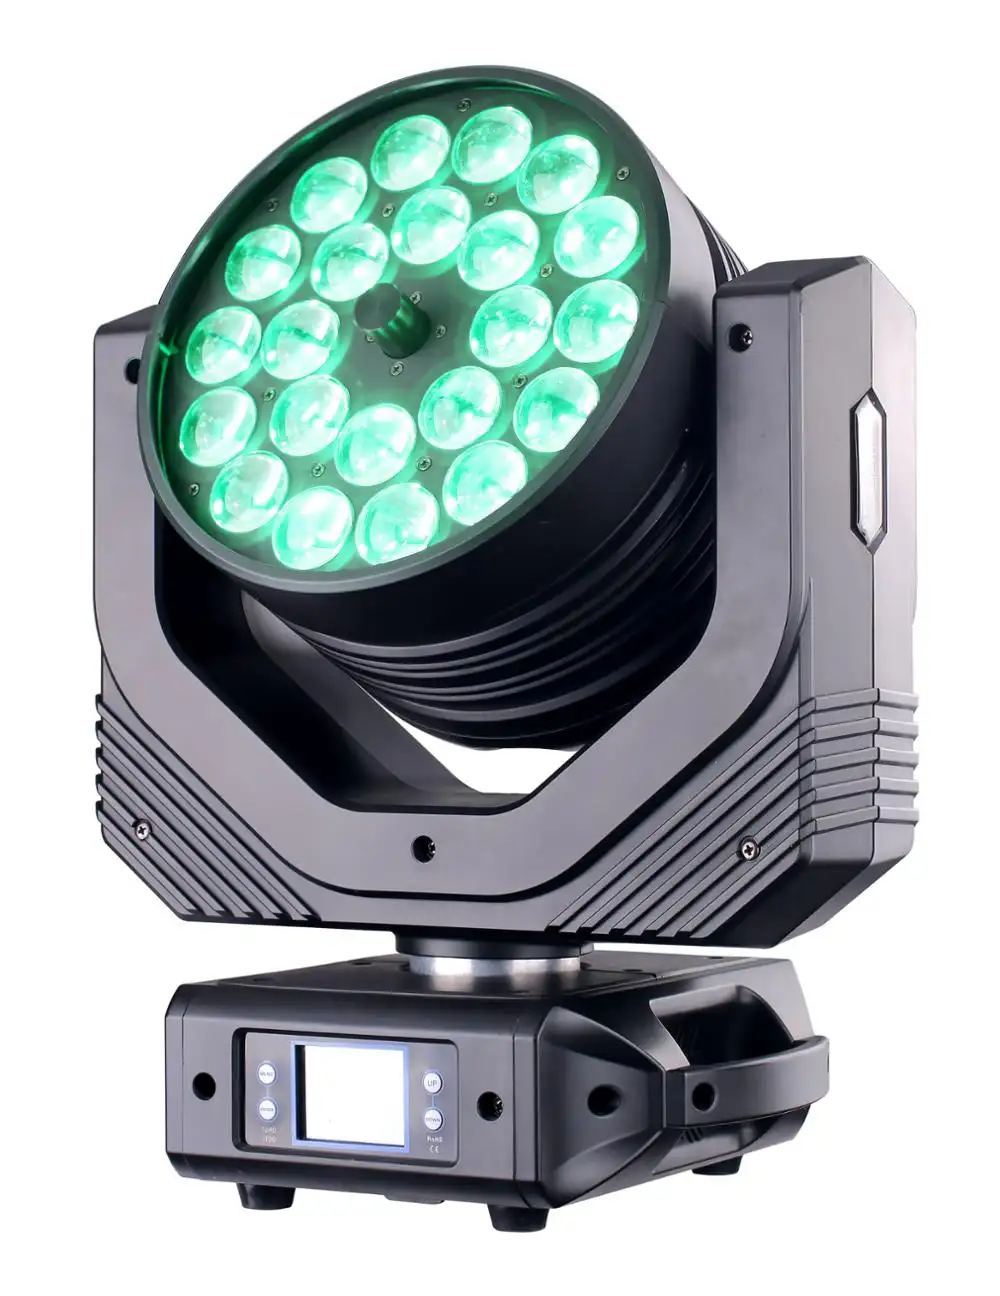 LED Wash 22pcs 15W Zoom Outdoor Stage dj Moving Head Light